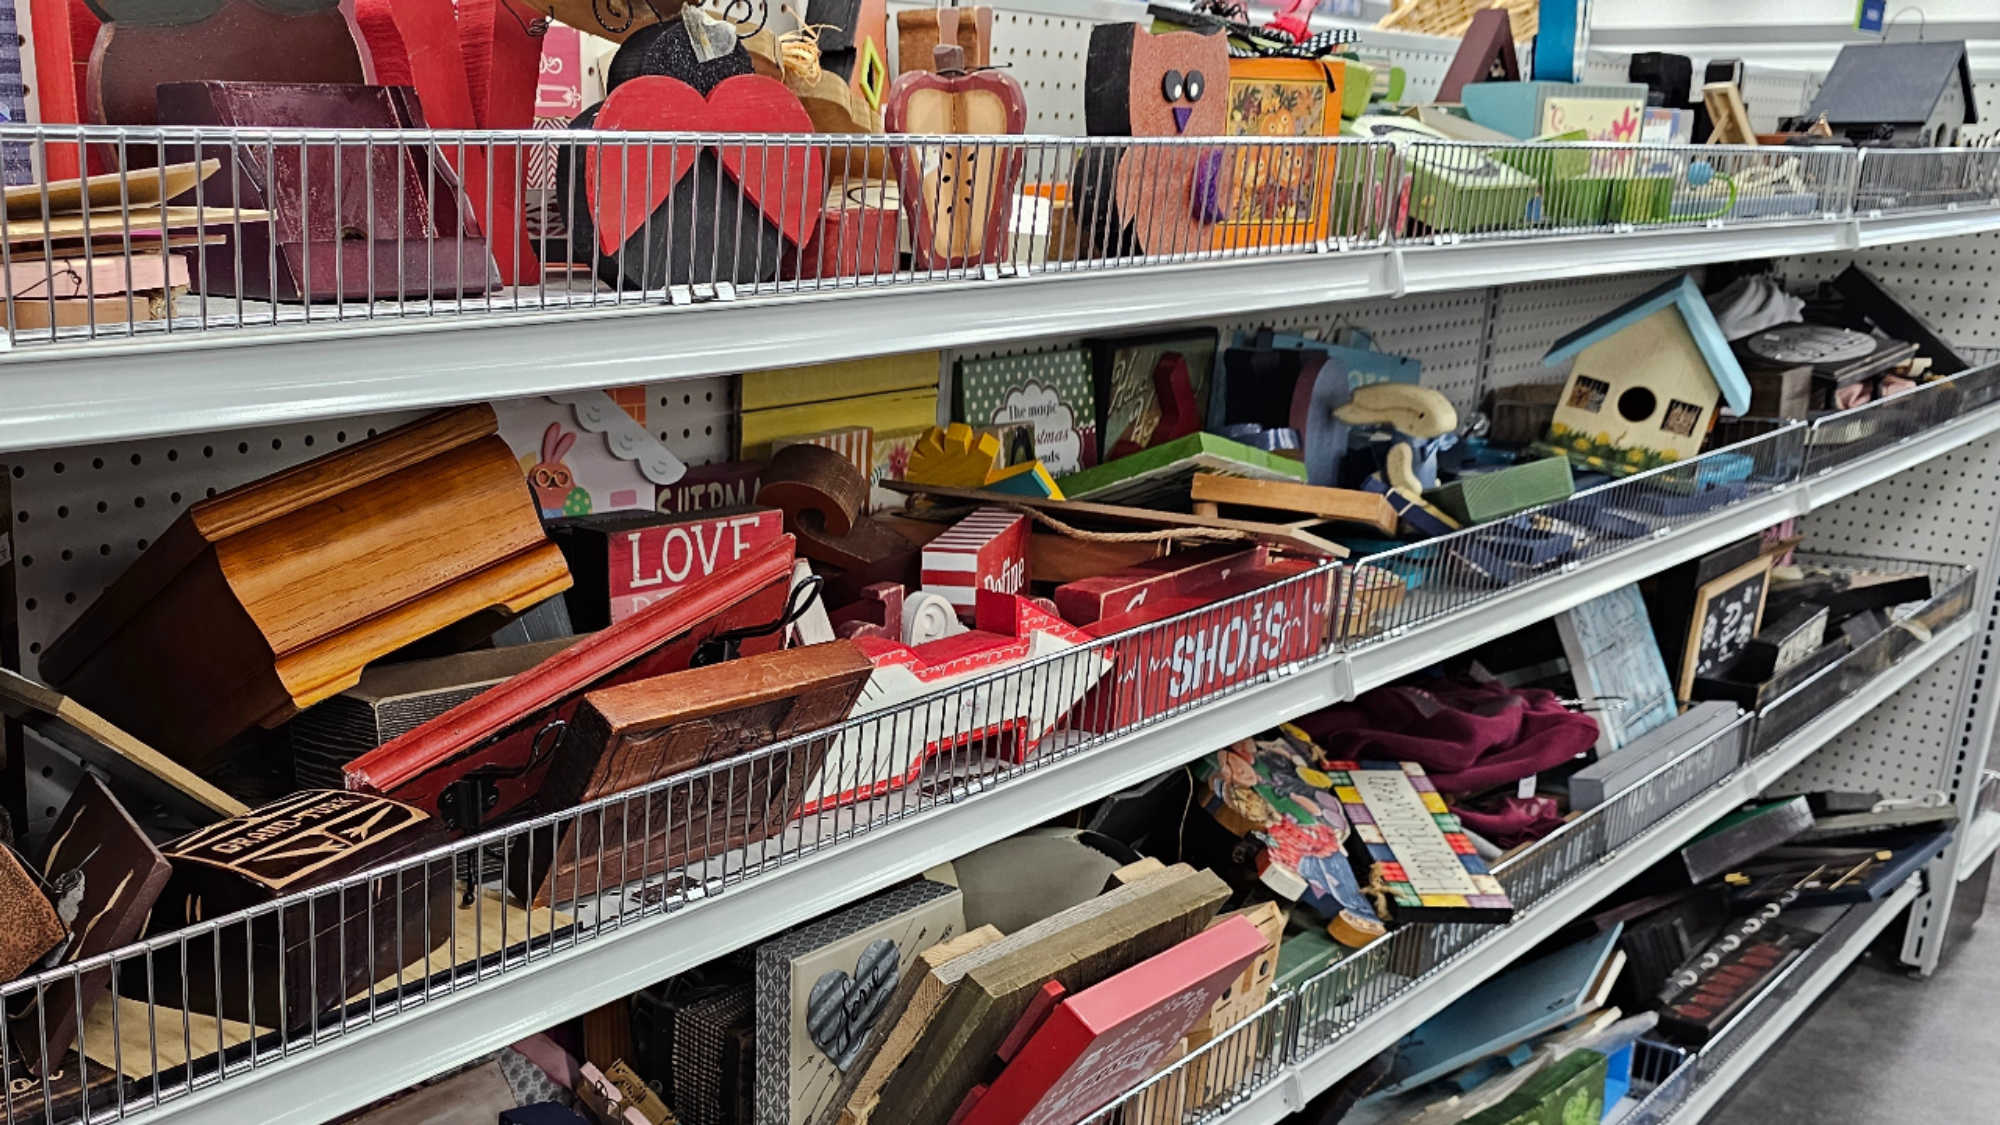 A row of shelves at DI featuring secondhand decor items that could be used to decorate a classroom.